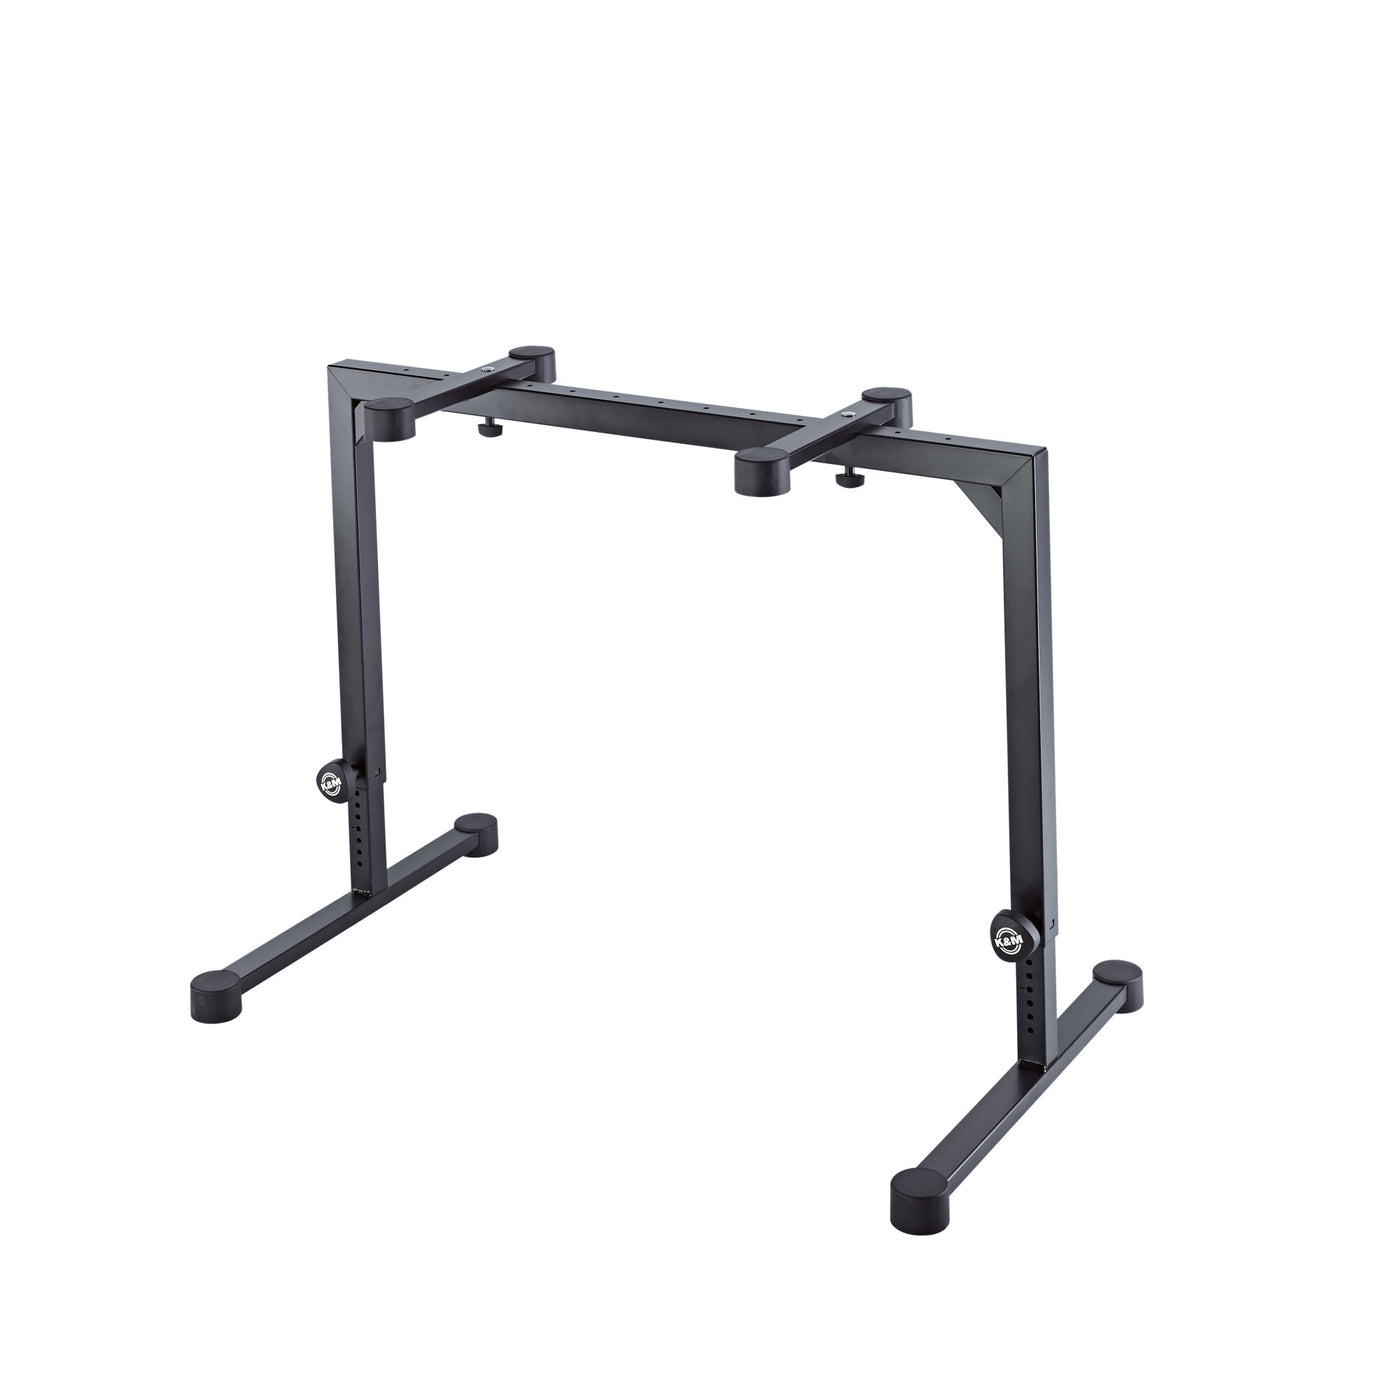 K&M Omega Table Style Keyboard Stand - Black